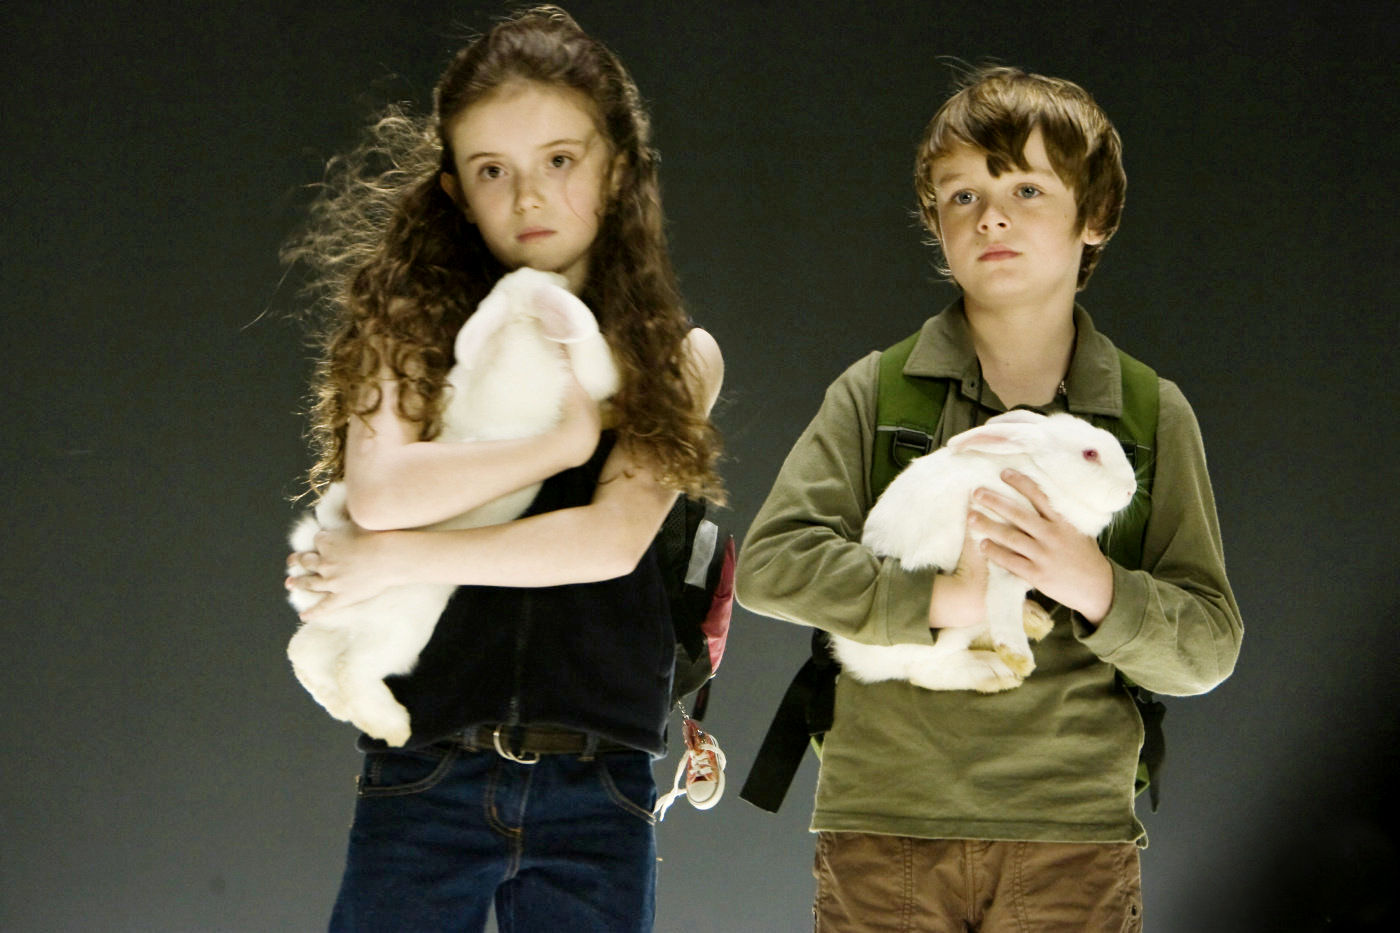 Lara Robinson stars as Lucinda / Abby and Chandler Canterbury stars as Caleb in Summit Entertainment's Knowing (2009)